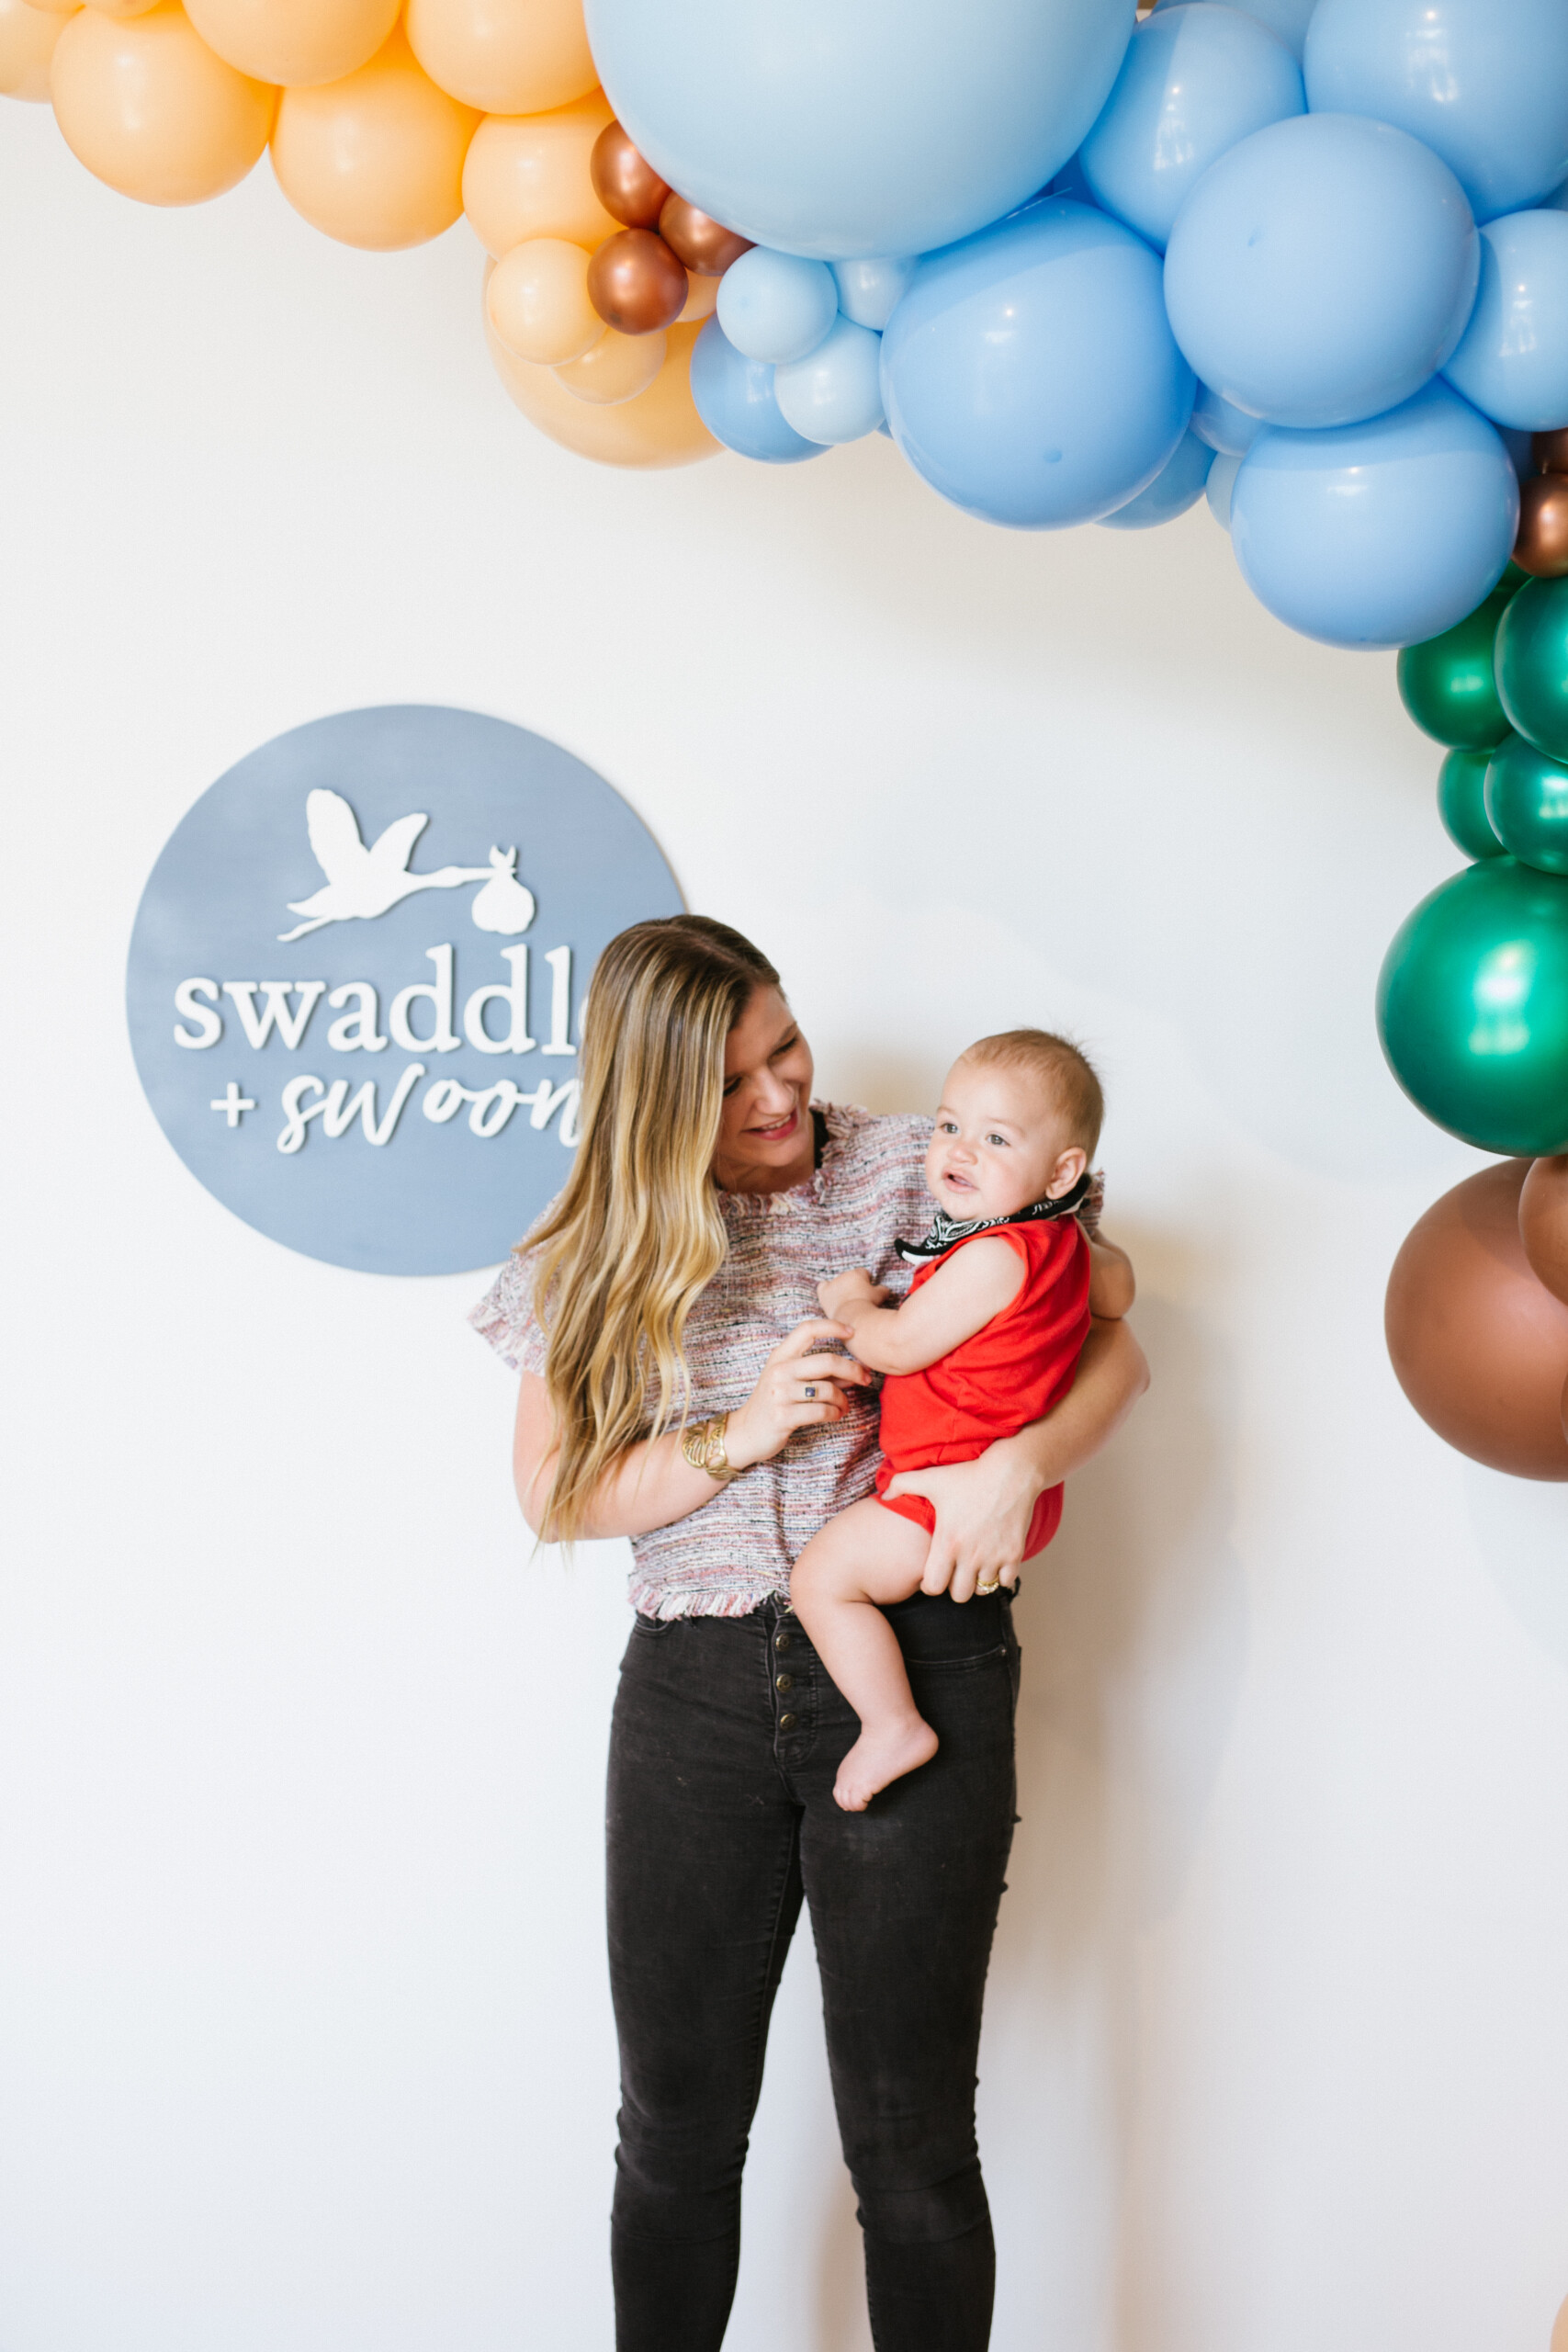 Come out to Swaddle + Swoon: A Baby Show in Nashville